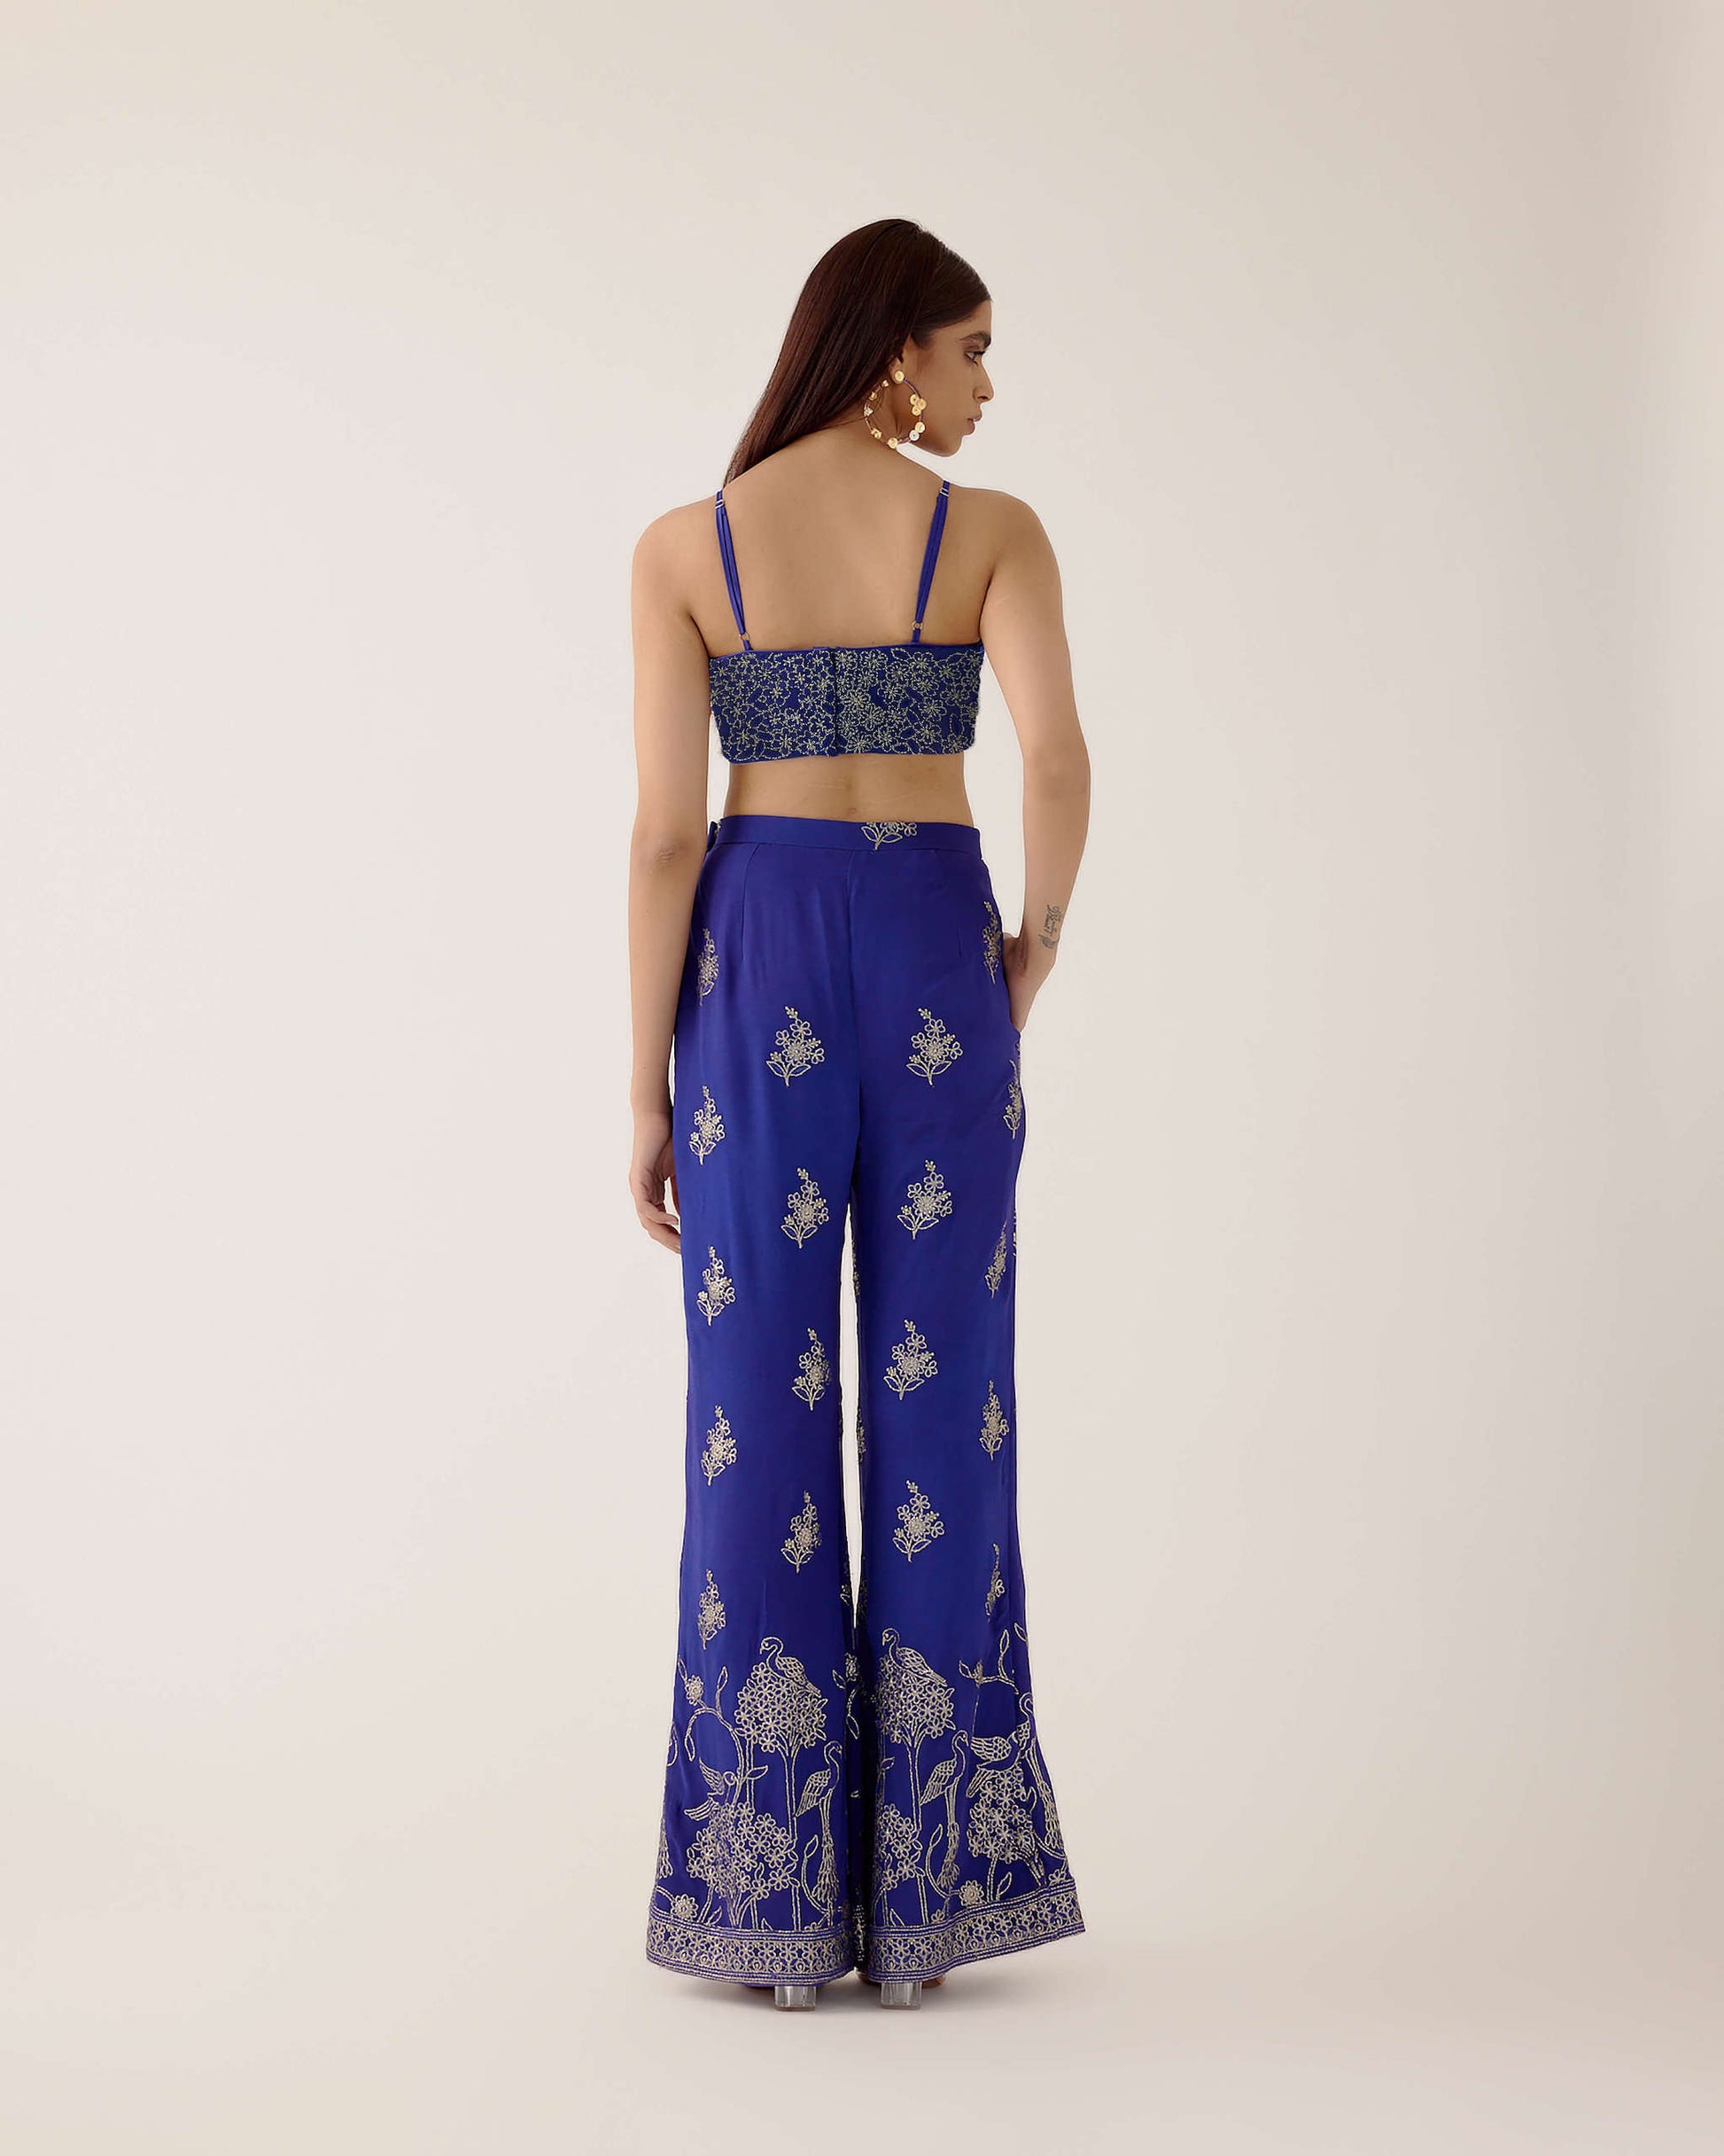 The embroidered Manali Set consists of a blue vest, bra top, and flared pants. 